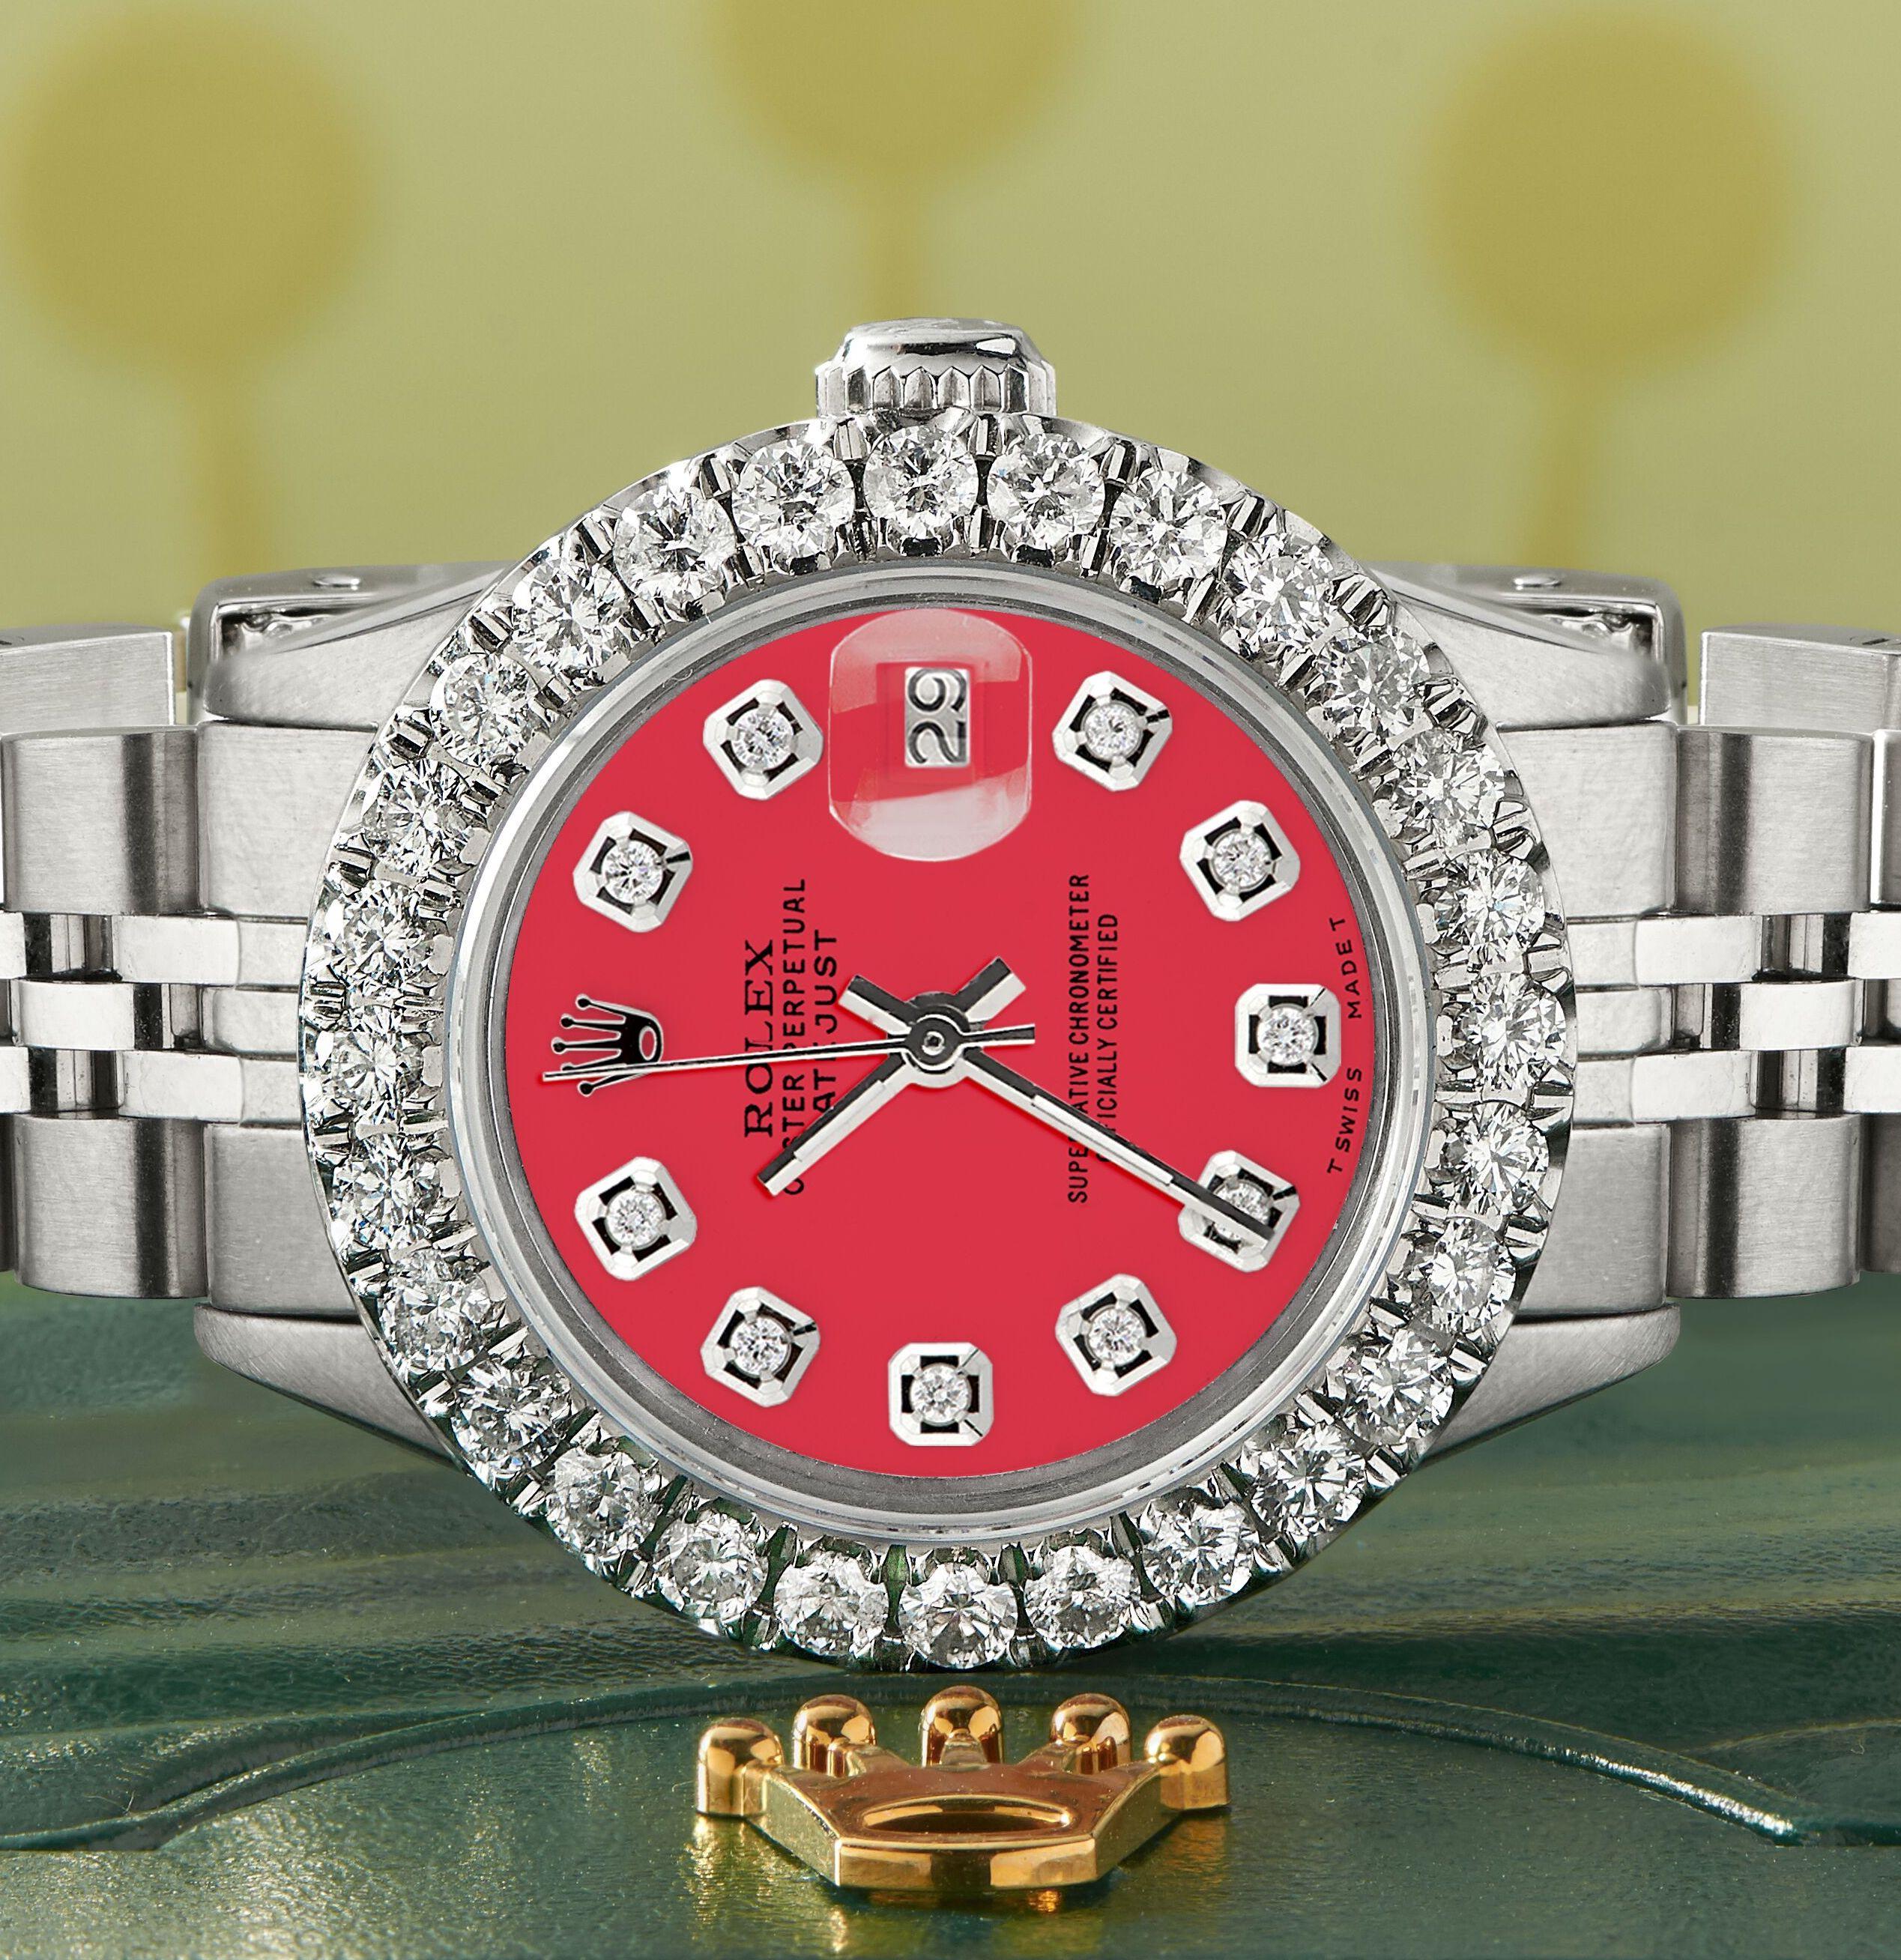 Rolex Datejust Steel Jubilee Watch 2 Carat Diamond Bezel / Scarlet Red Dial In Excellent Condition For Sale In New York, NY